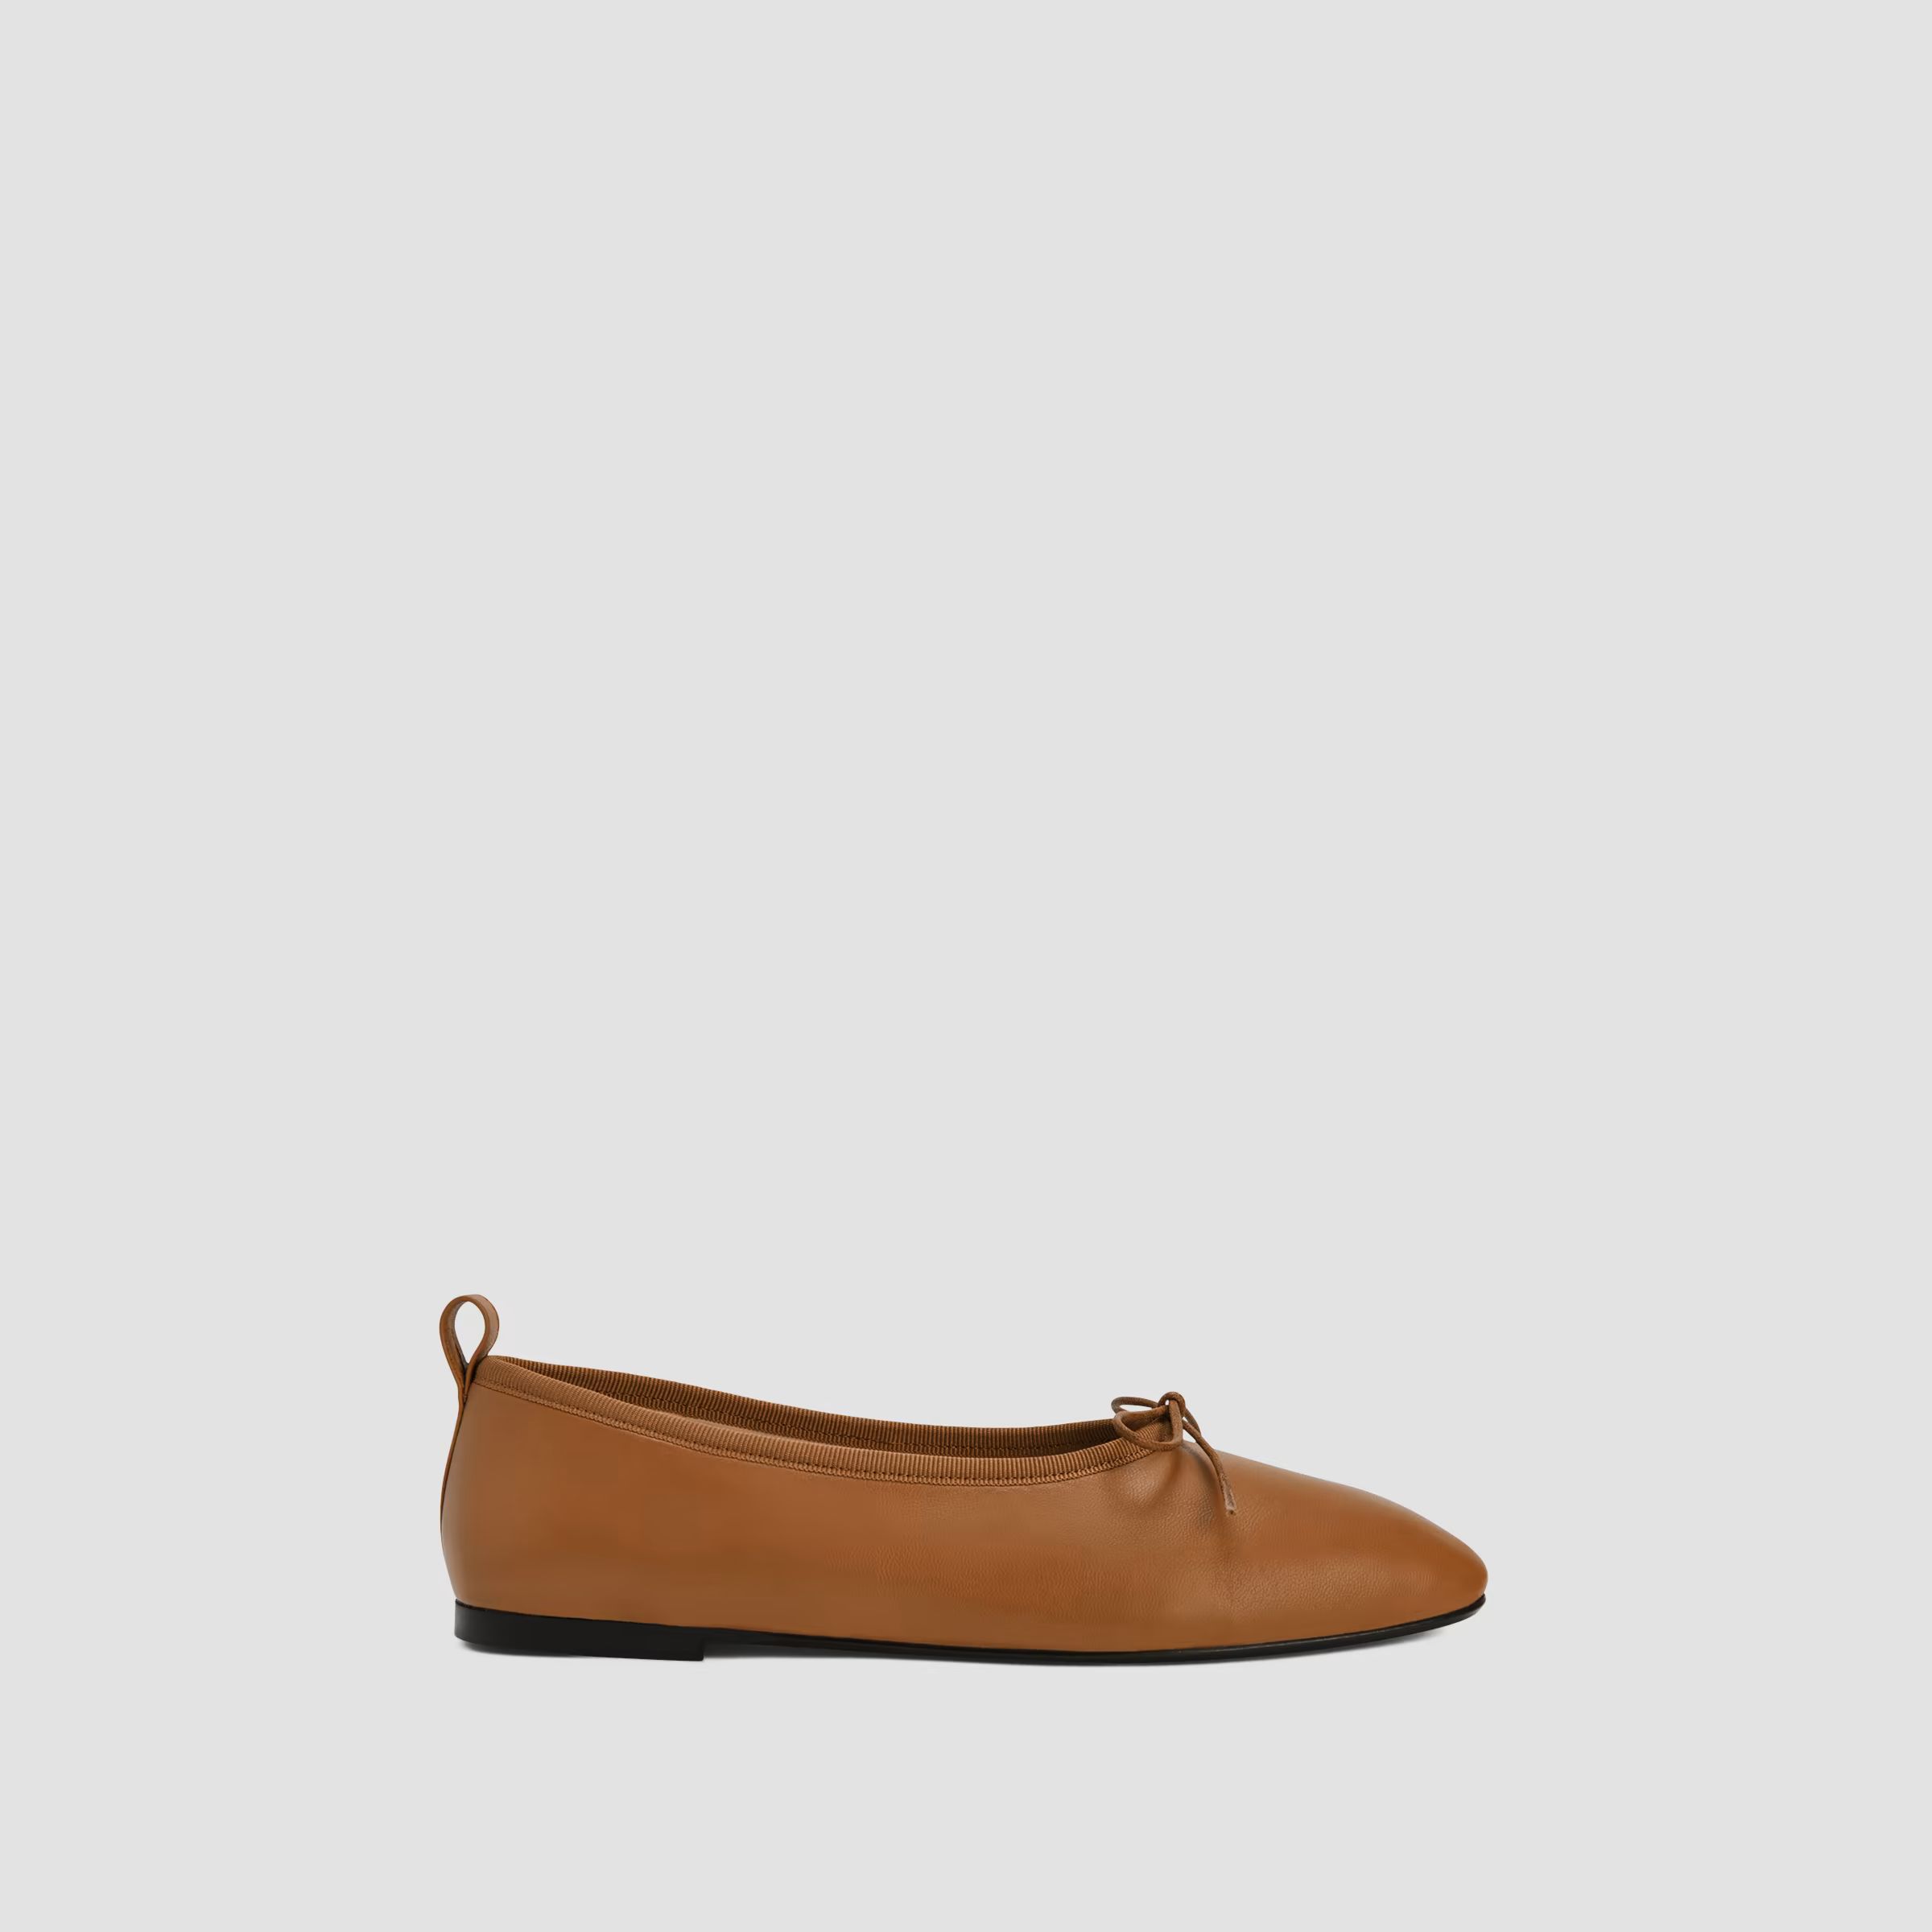 The Italian Leather Day Ballet Flat | Everlane